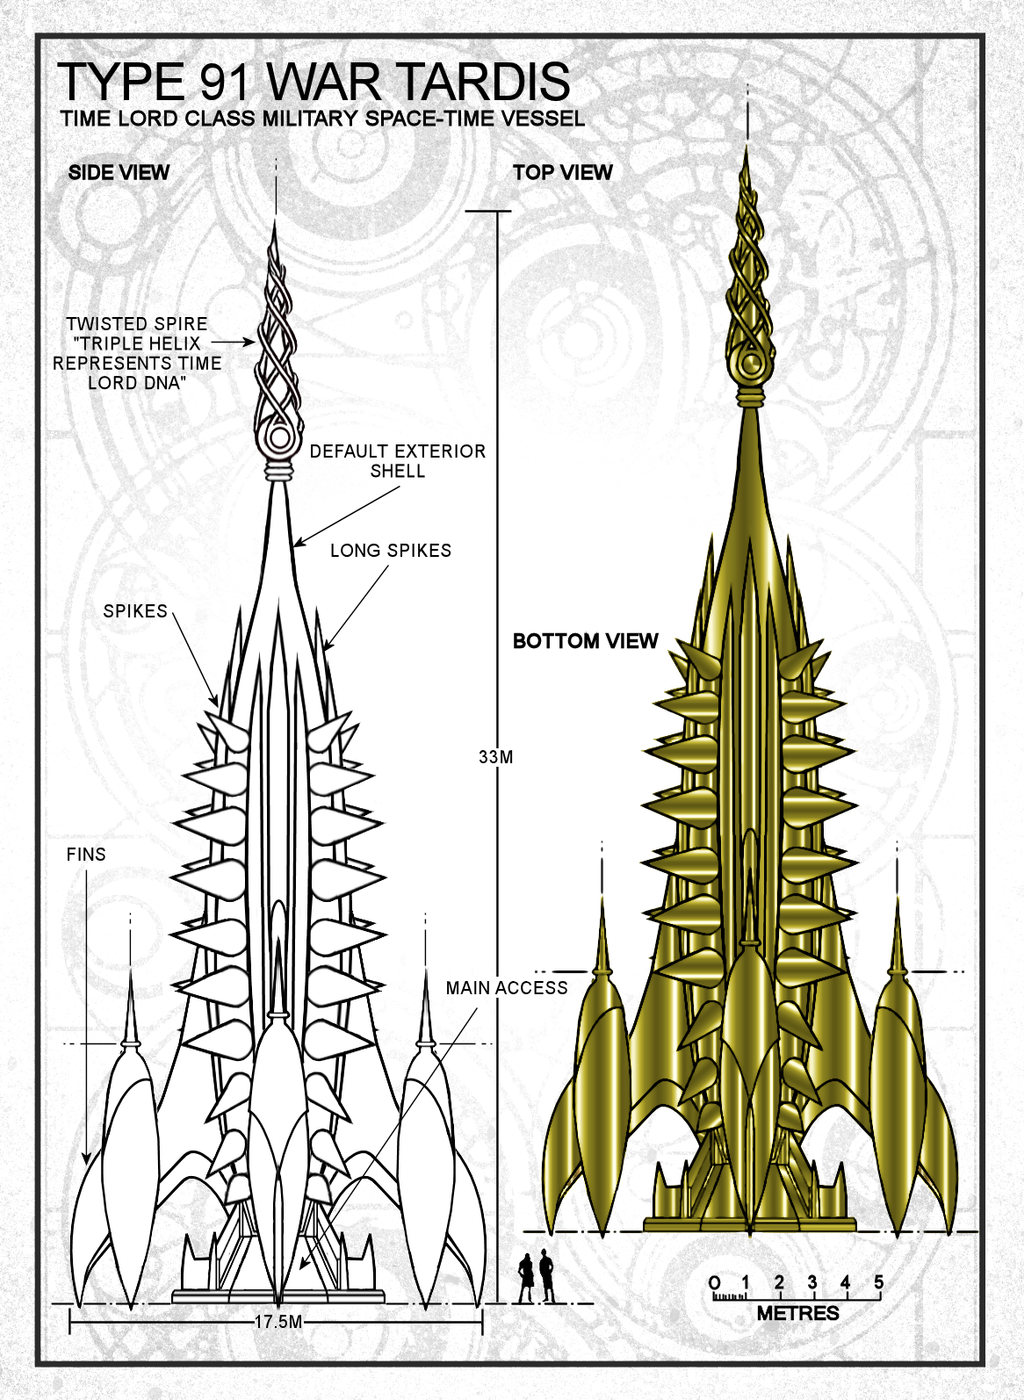 http://fc05.deviantart.net/fs71/i/2014/110/8/3/type_91_tardis_war_spire_preview_by_time_lord_rassilon-d7f9j4s.png